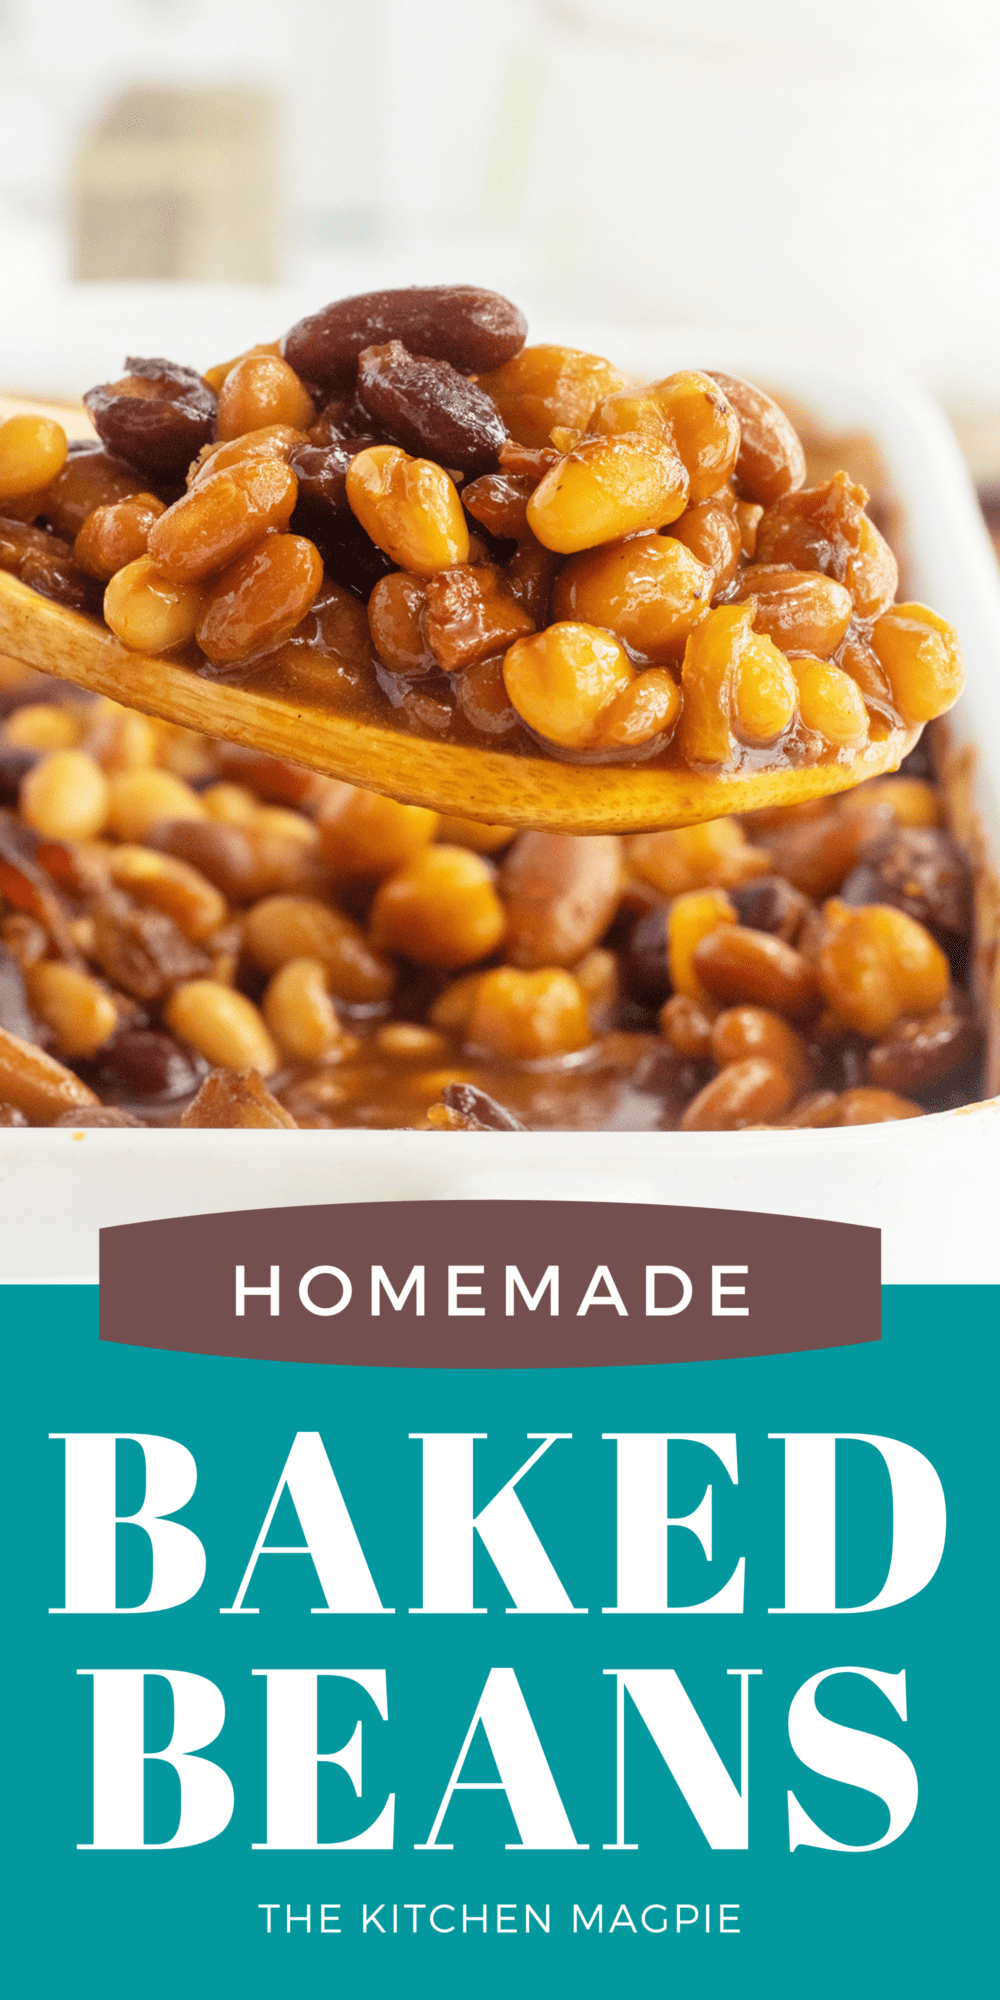 This classic homemade baked beans recipe makes for a proper North American, rich, and filling baked beans dish that is a meal all on its own.